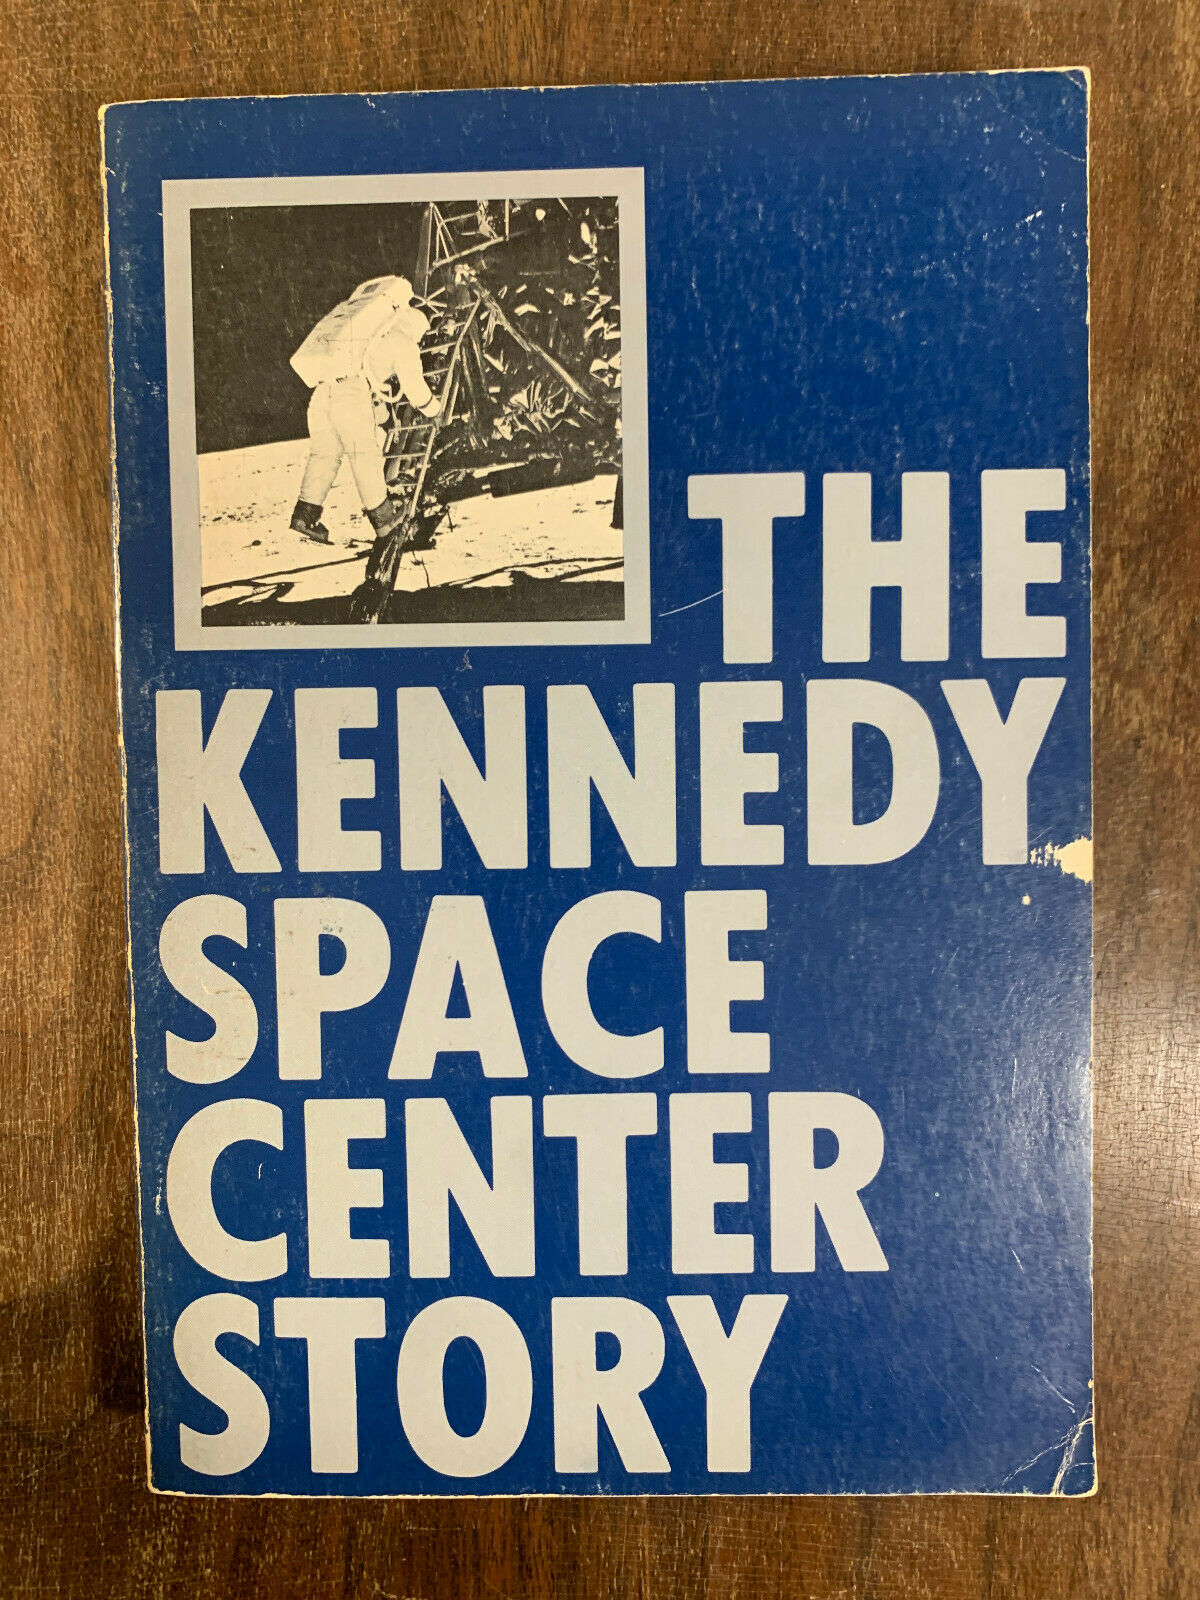 The Kennedy Space Center Story, NASA, 1974 Illustrated (C2)